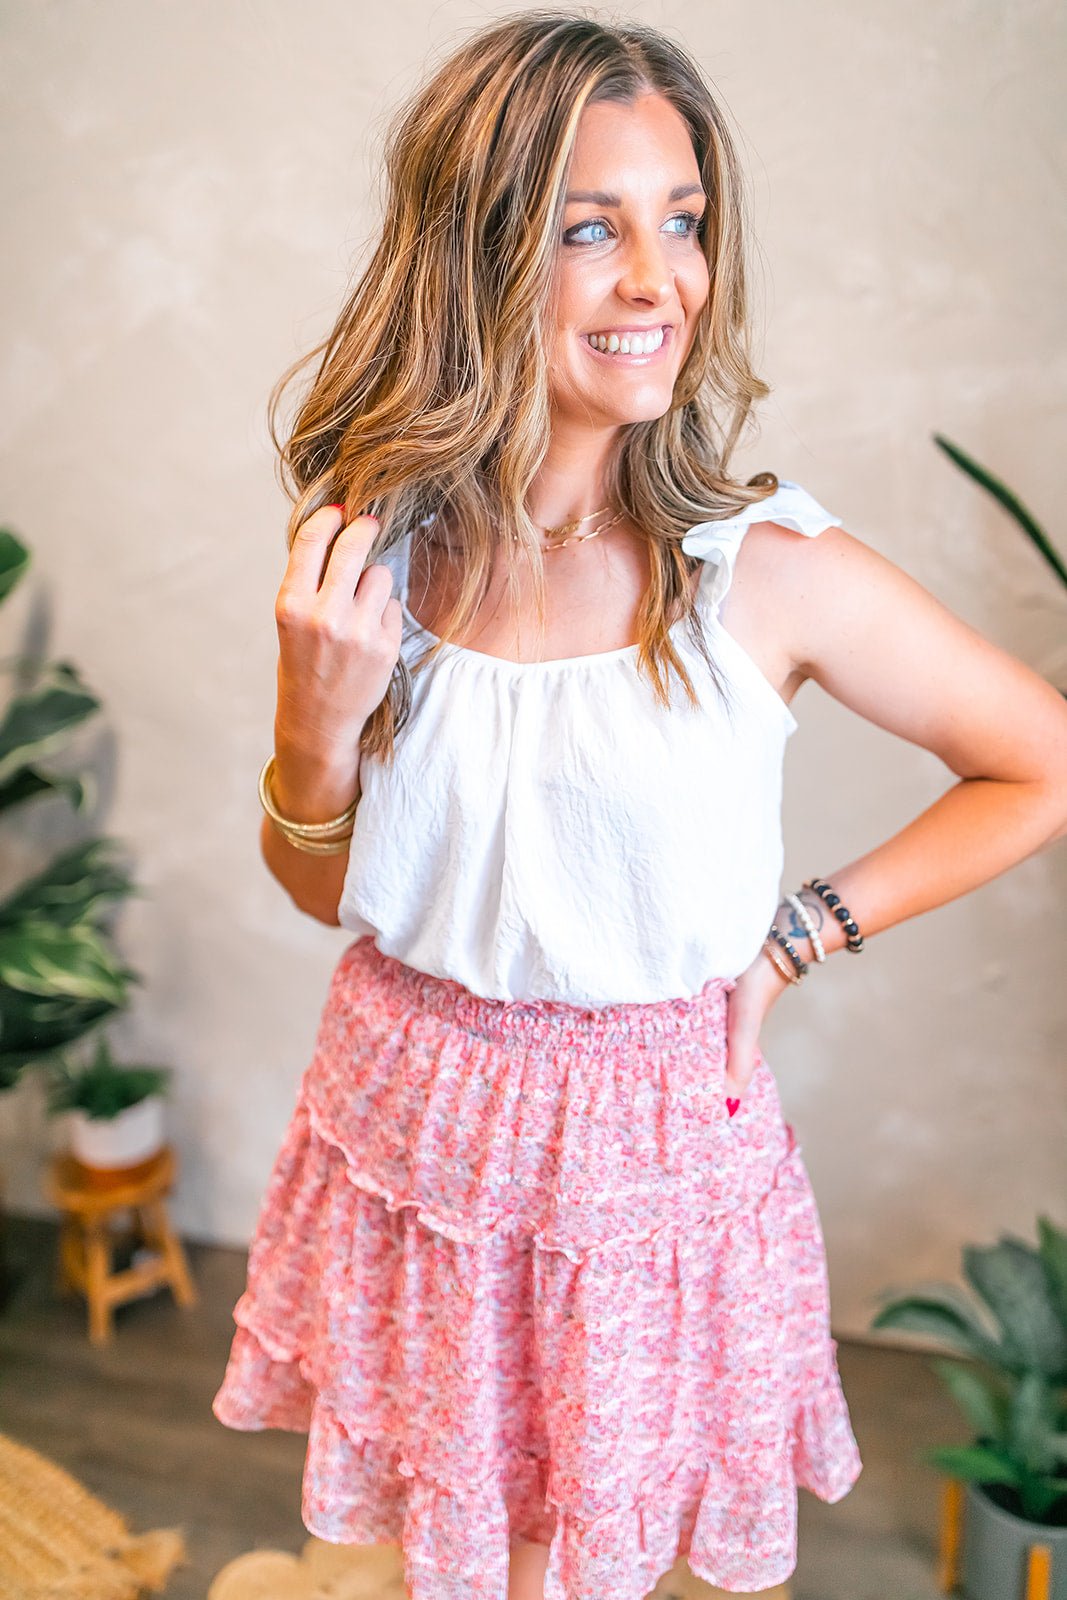 One Eleven Olive Boutique The Madison Mini Skirt The Madison Mini Skirt is the perfect piece to add a pop of fun to any outfit. With its shades of red, pink and green floral print, this skirt is sure to stand out! 